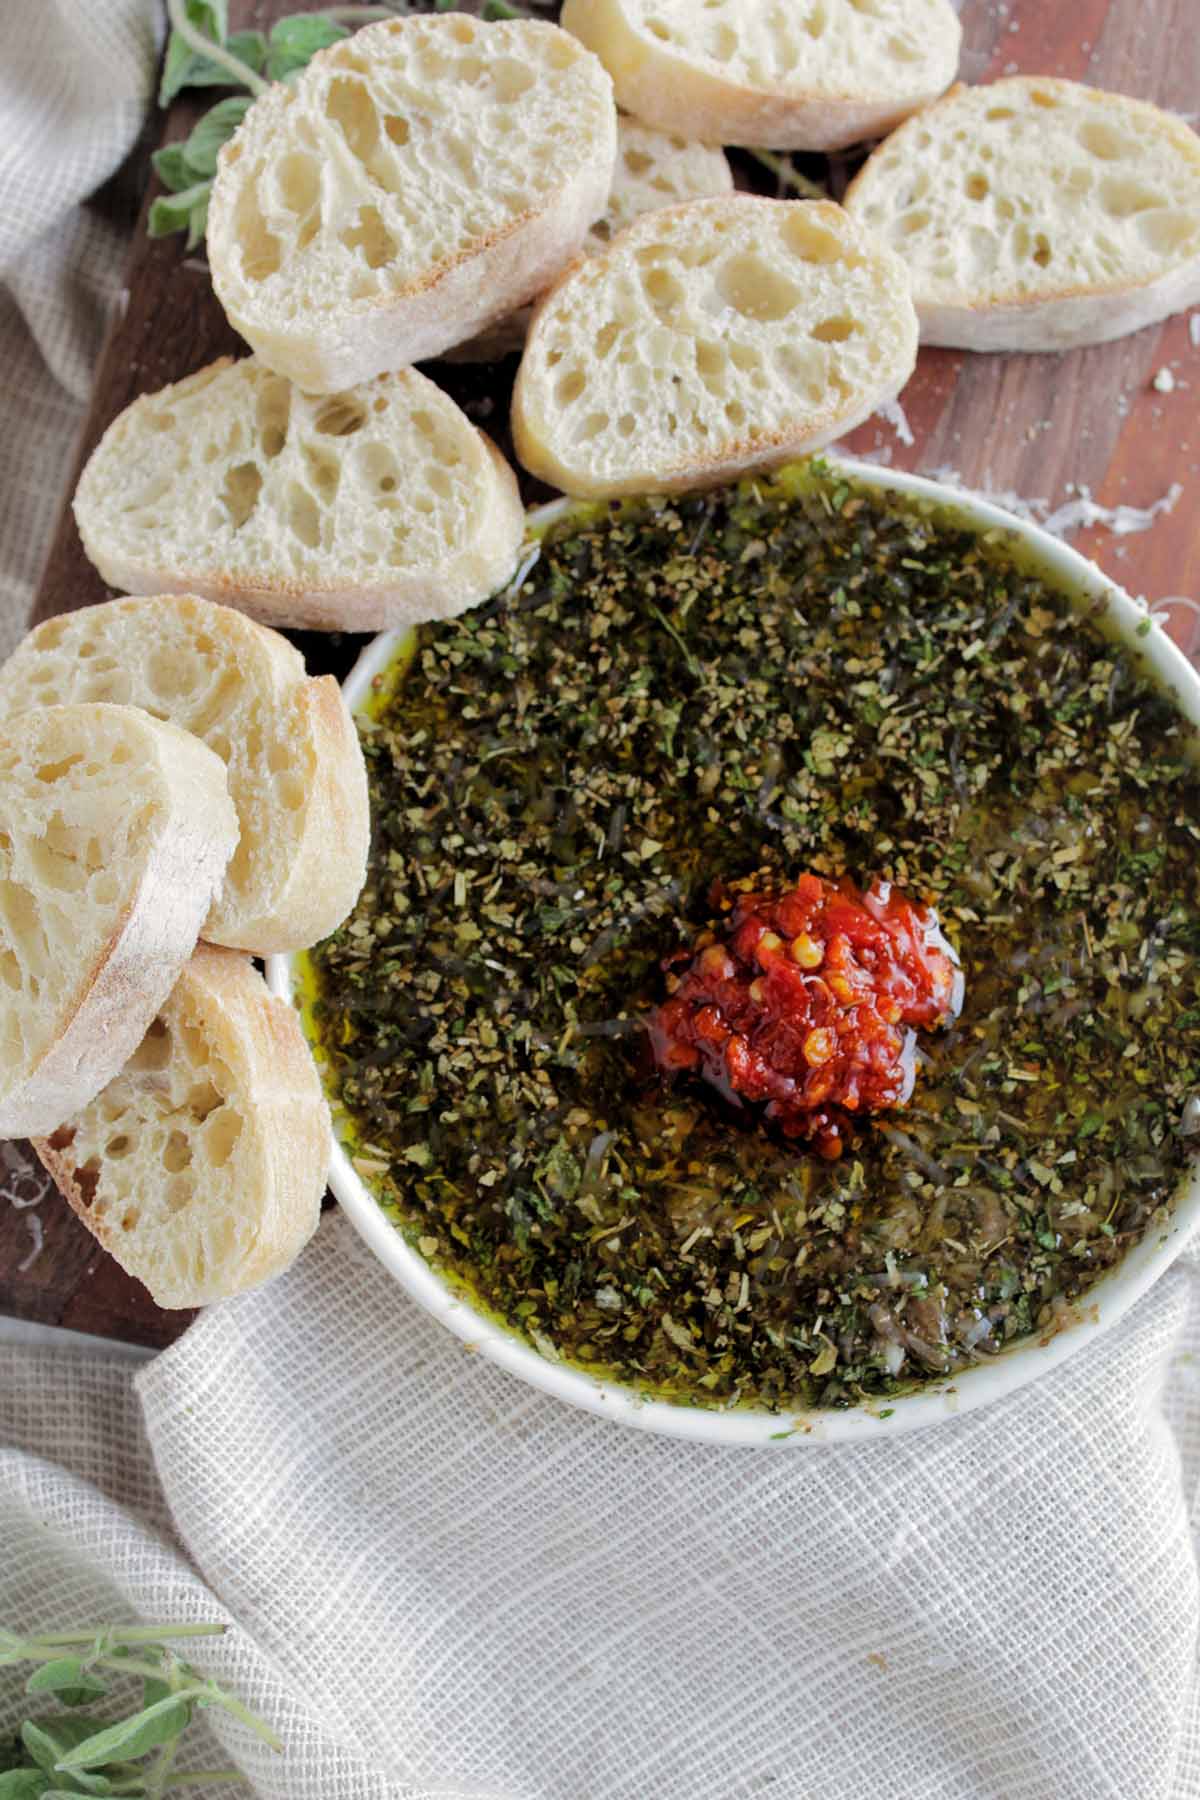 bread dipping oil with herbs.